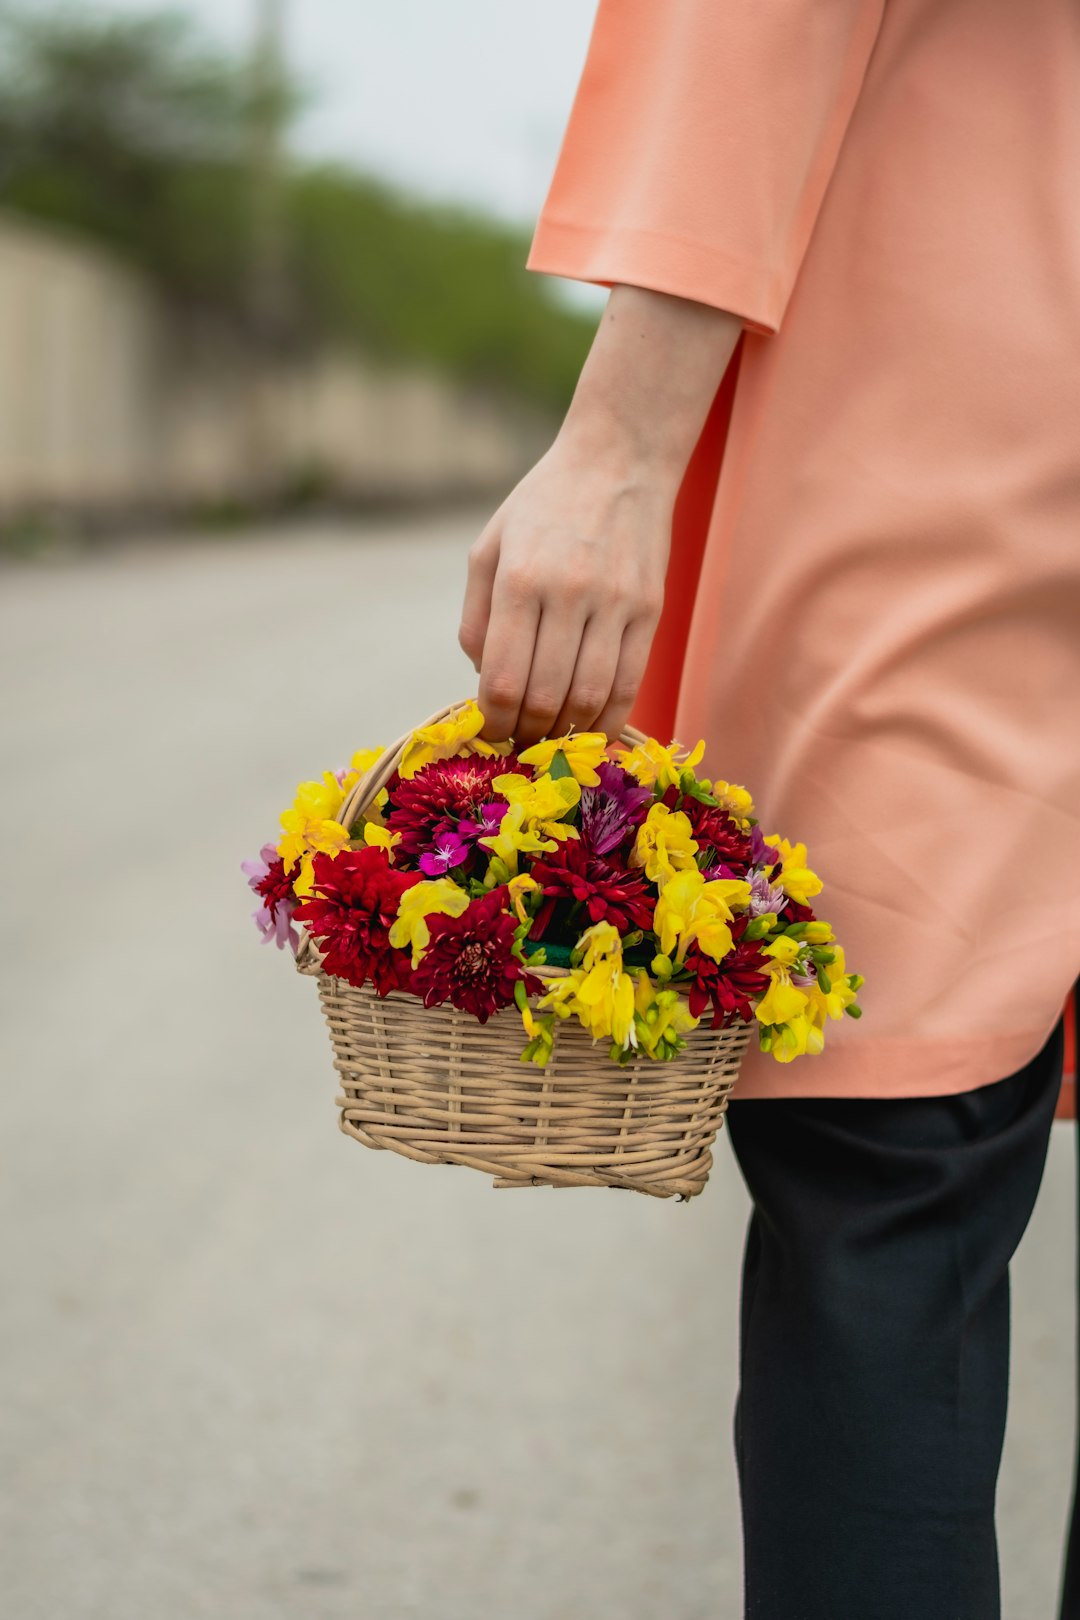 person holding yellow and purple flower bouquet